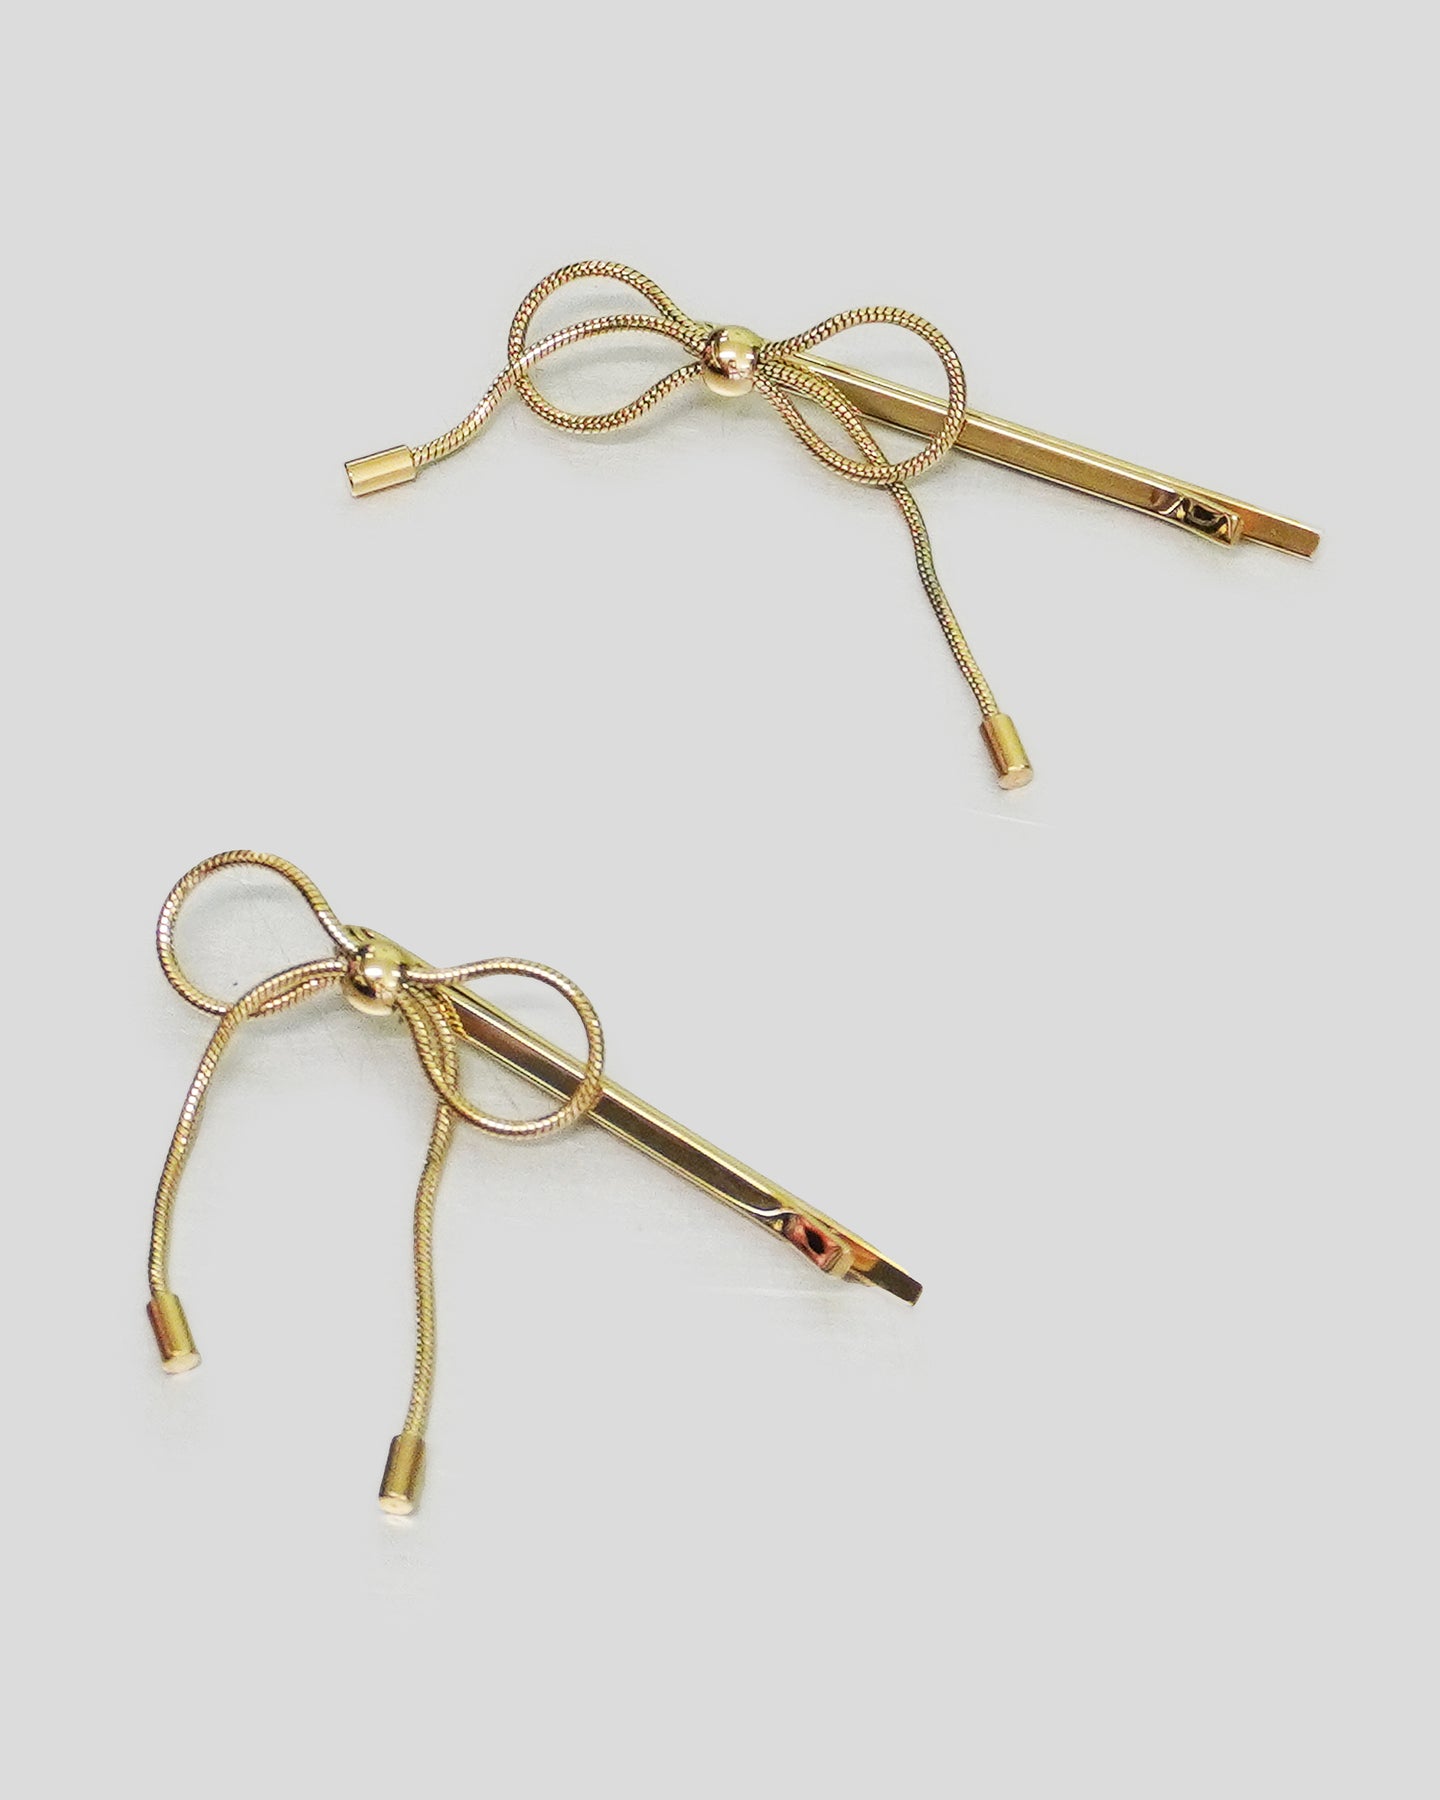 Marland Backus - Pair of Gold Bow Hairpins